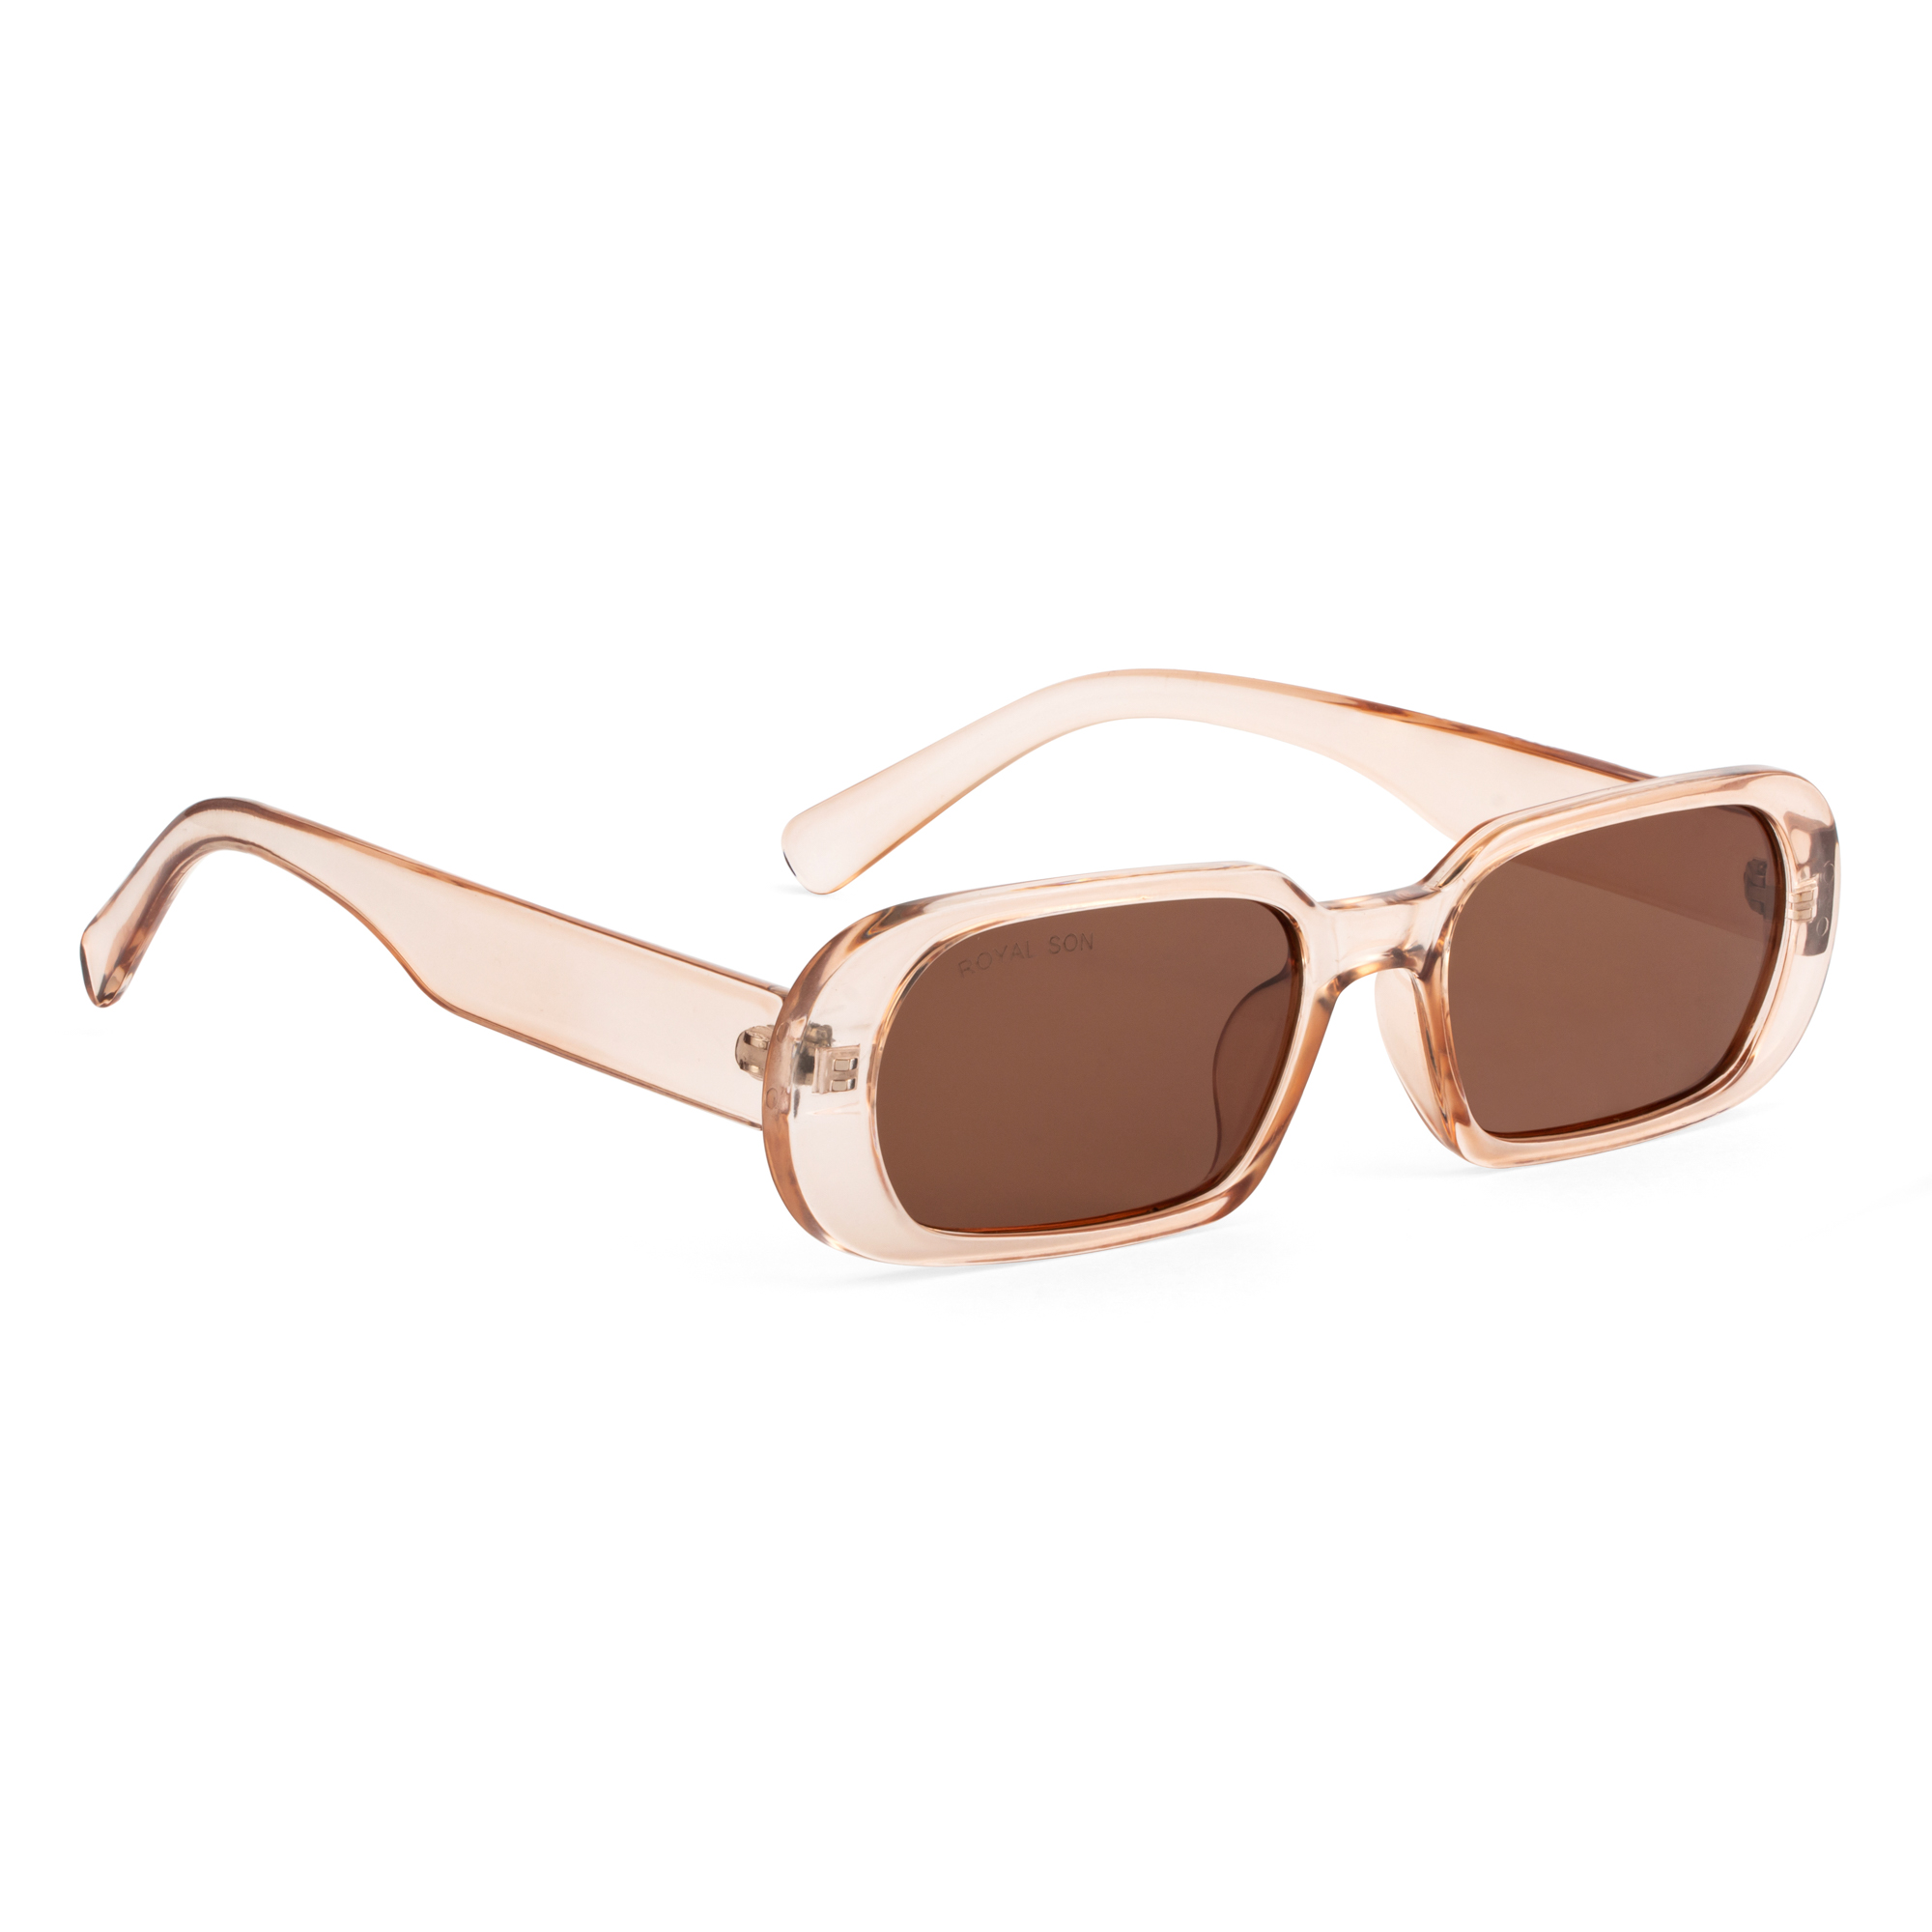 Buy Rectangle Frame Sunglasses Online at Best Price